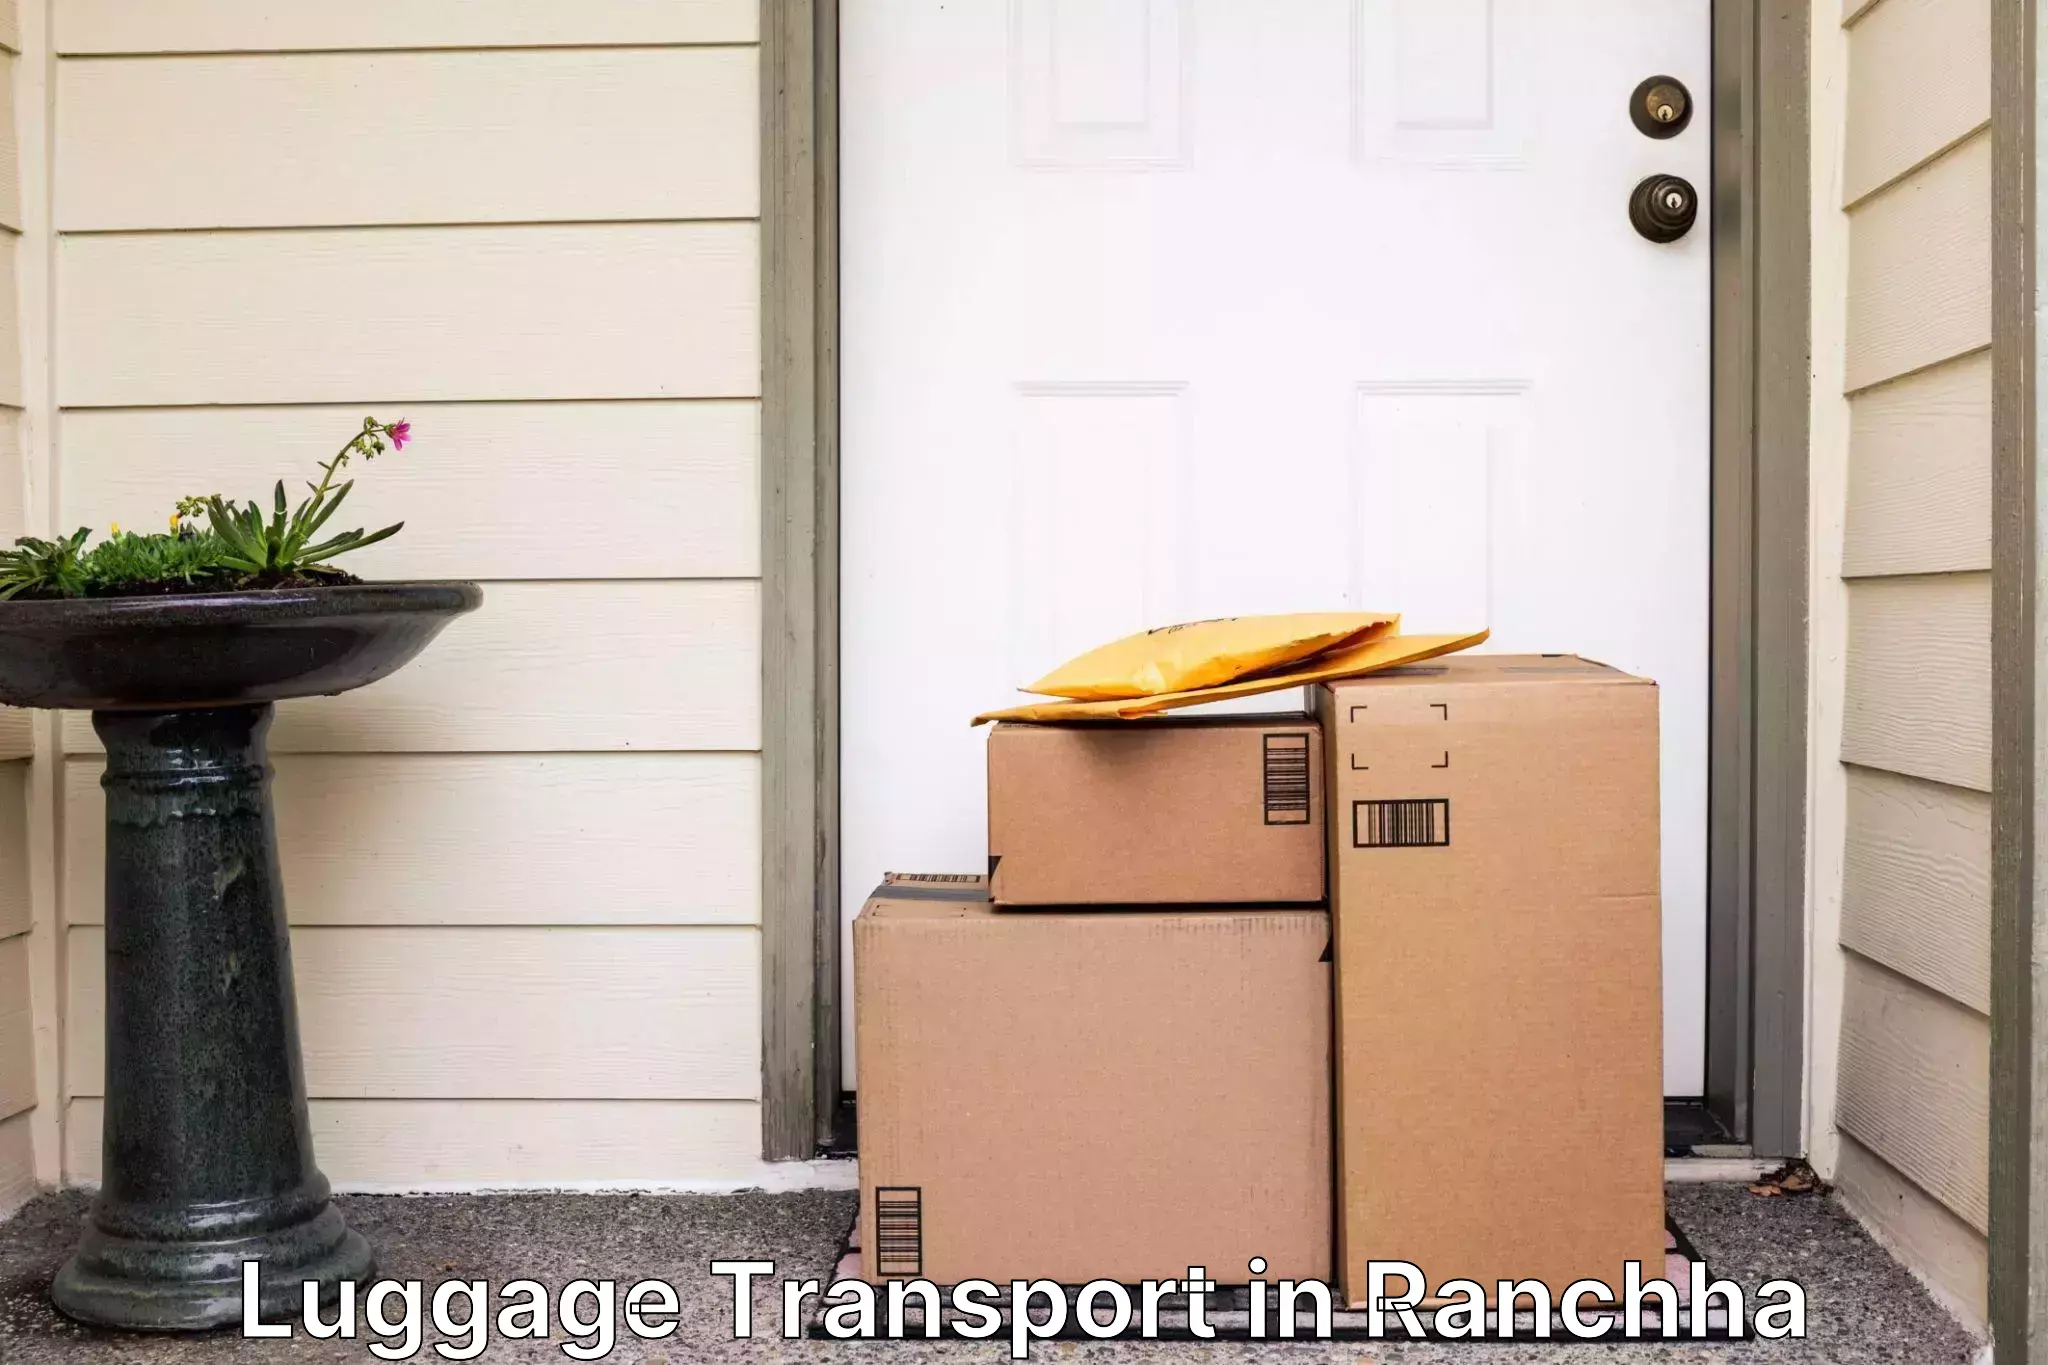 Baggage relocation service in Ranchha